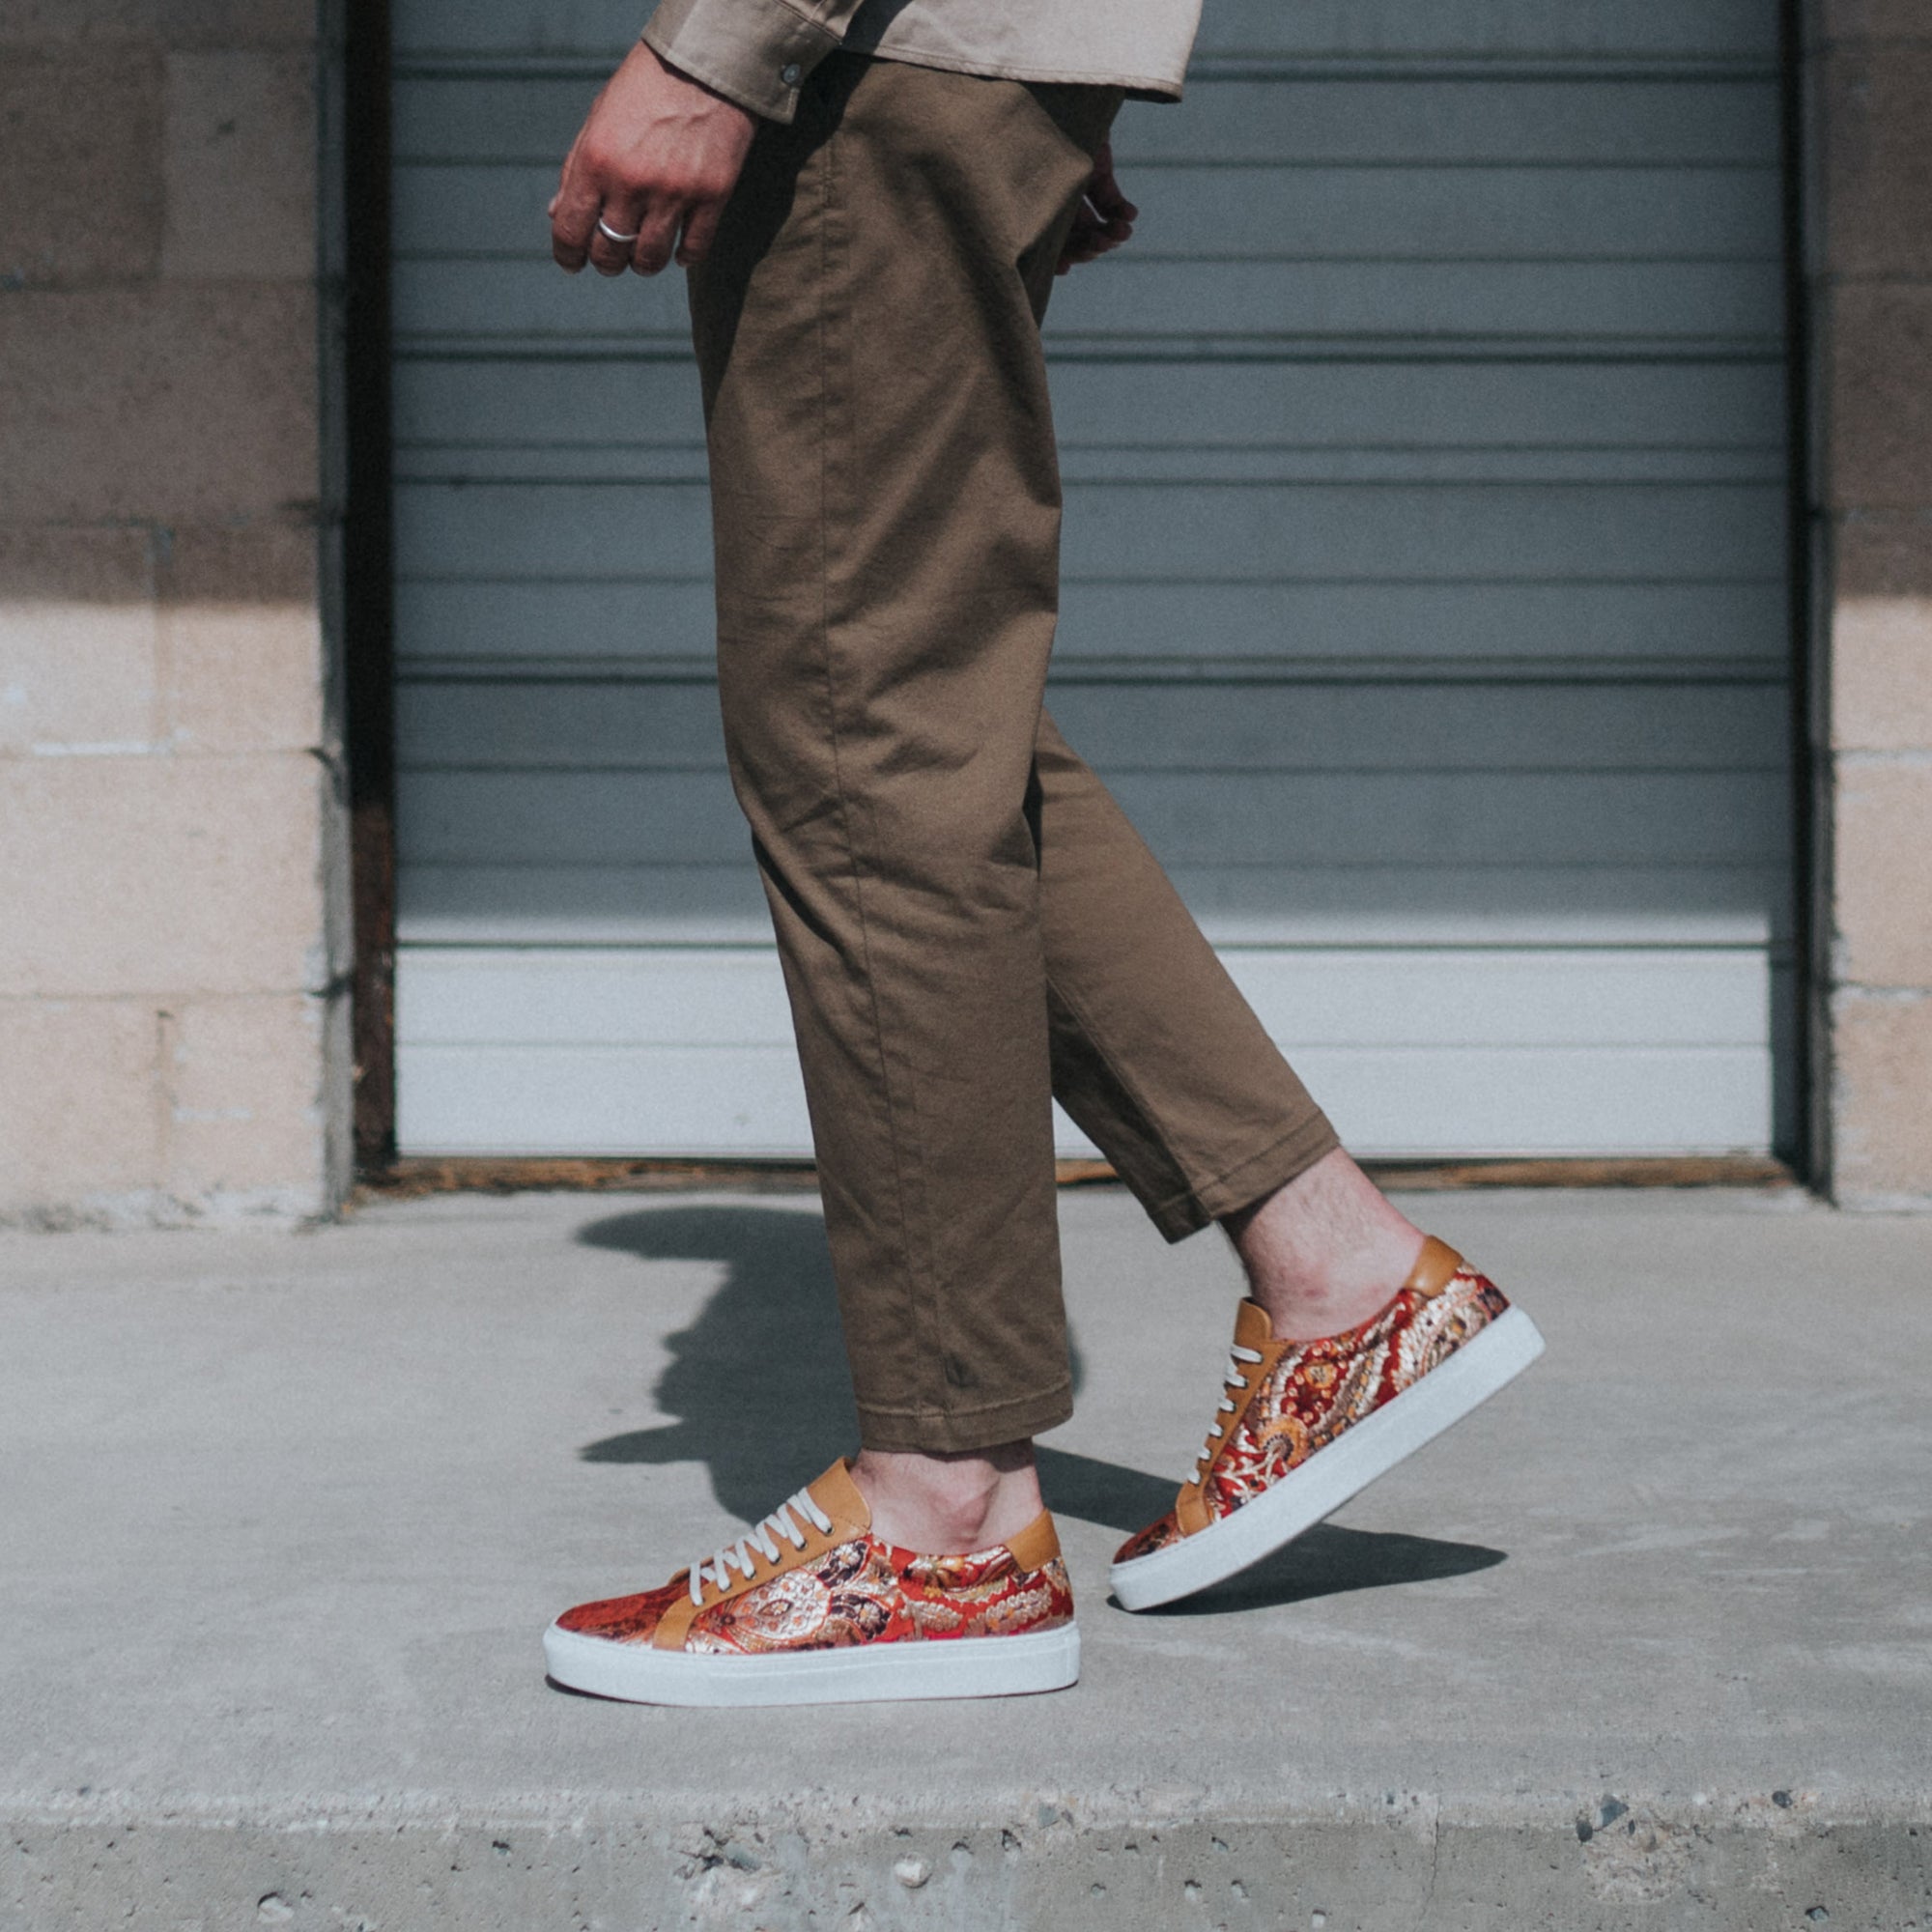 model walking in front of an old garage door wearing the sneaker in red paisley with brown pants